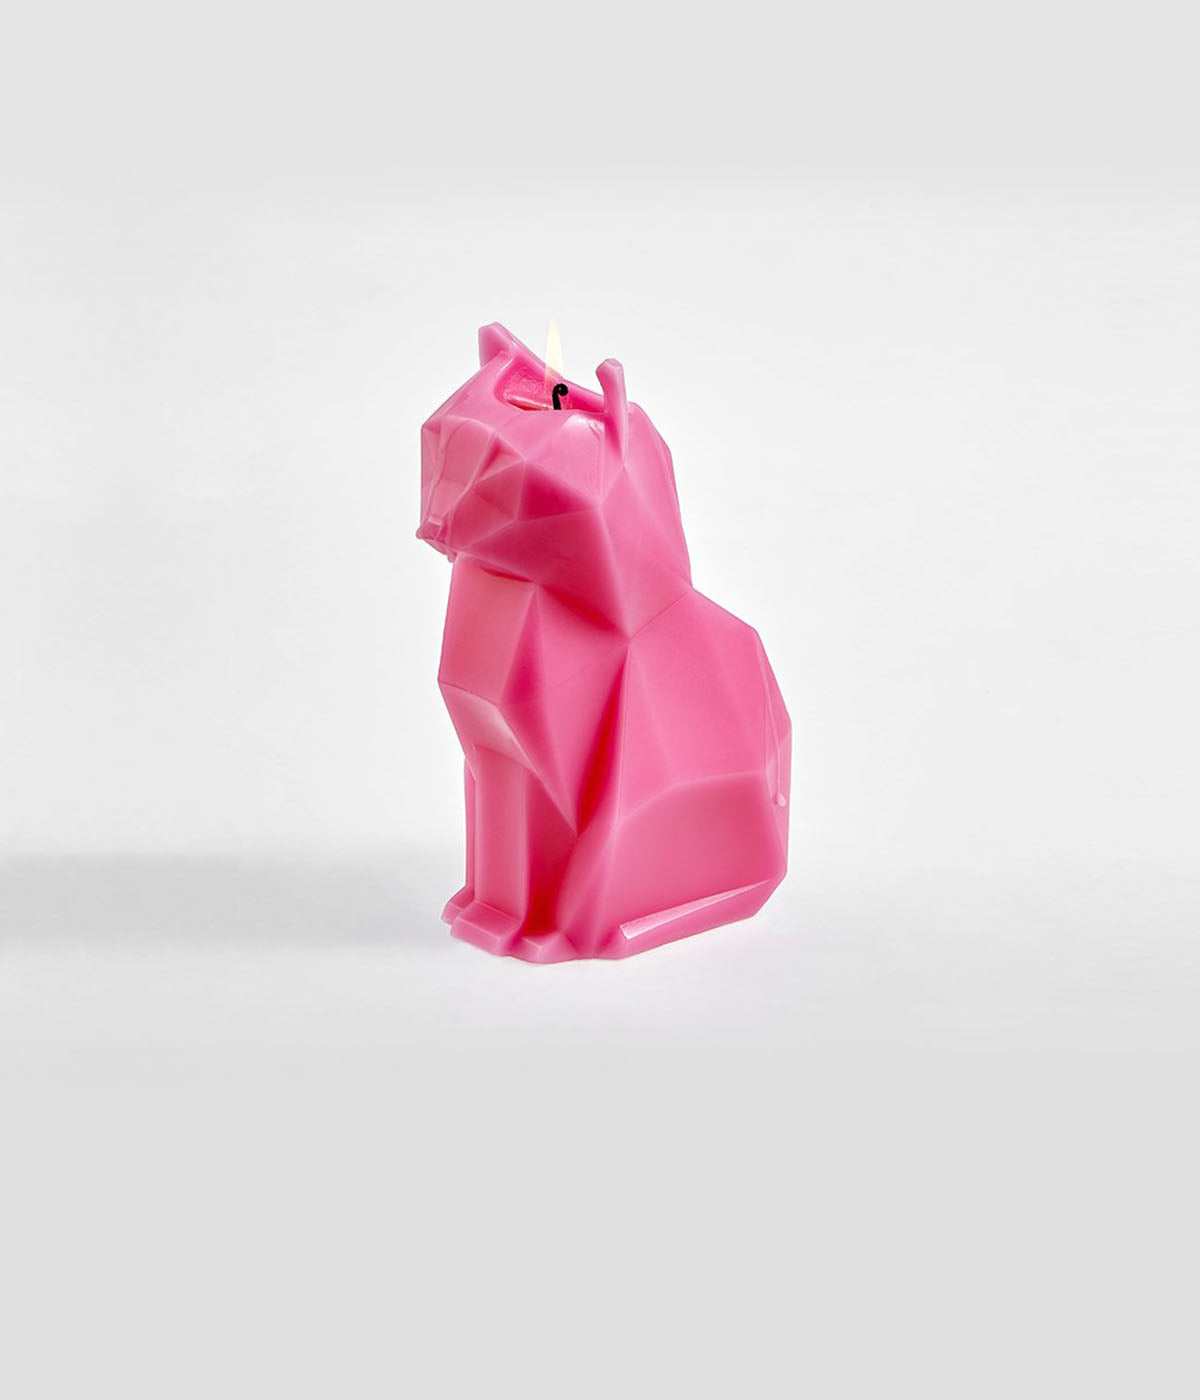 PyroPet Kisa Candle Neon Pink (Scented)